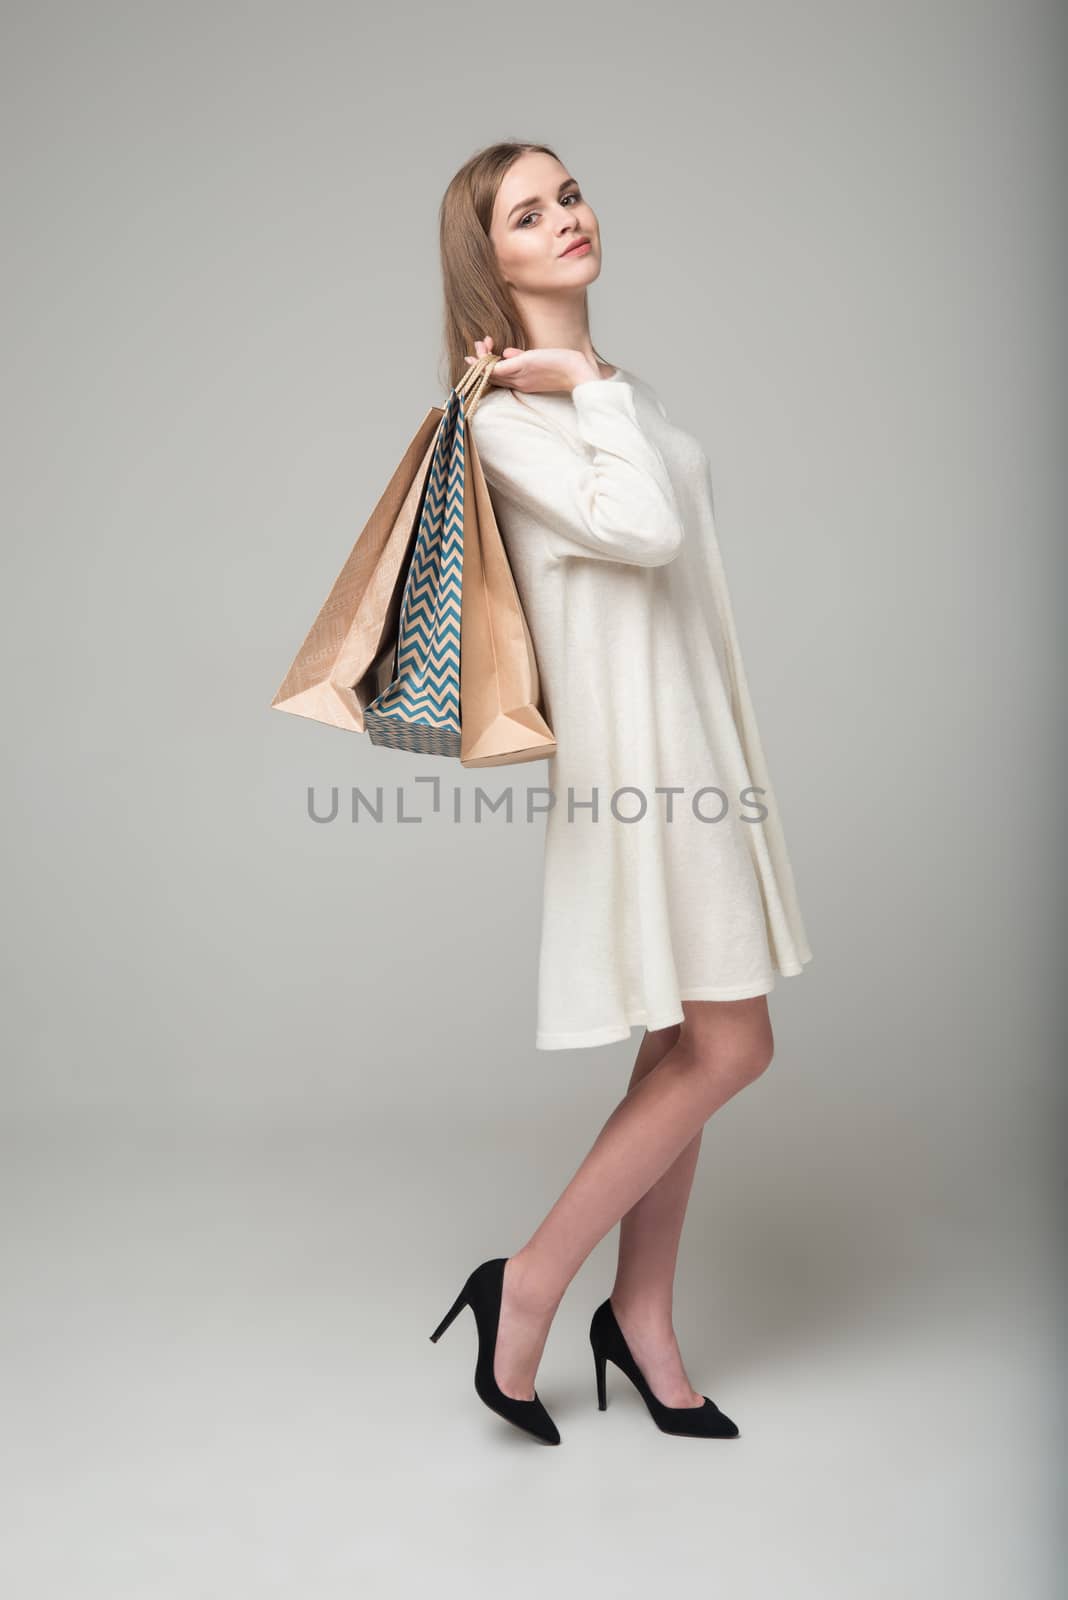 Smiling blond girl in white short dress with paper bags by VeraVerano